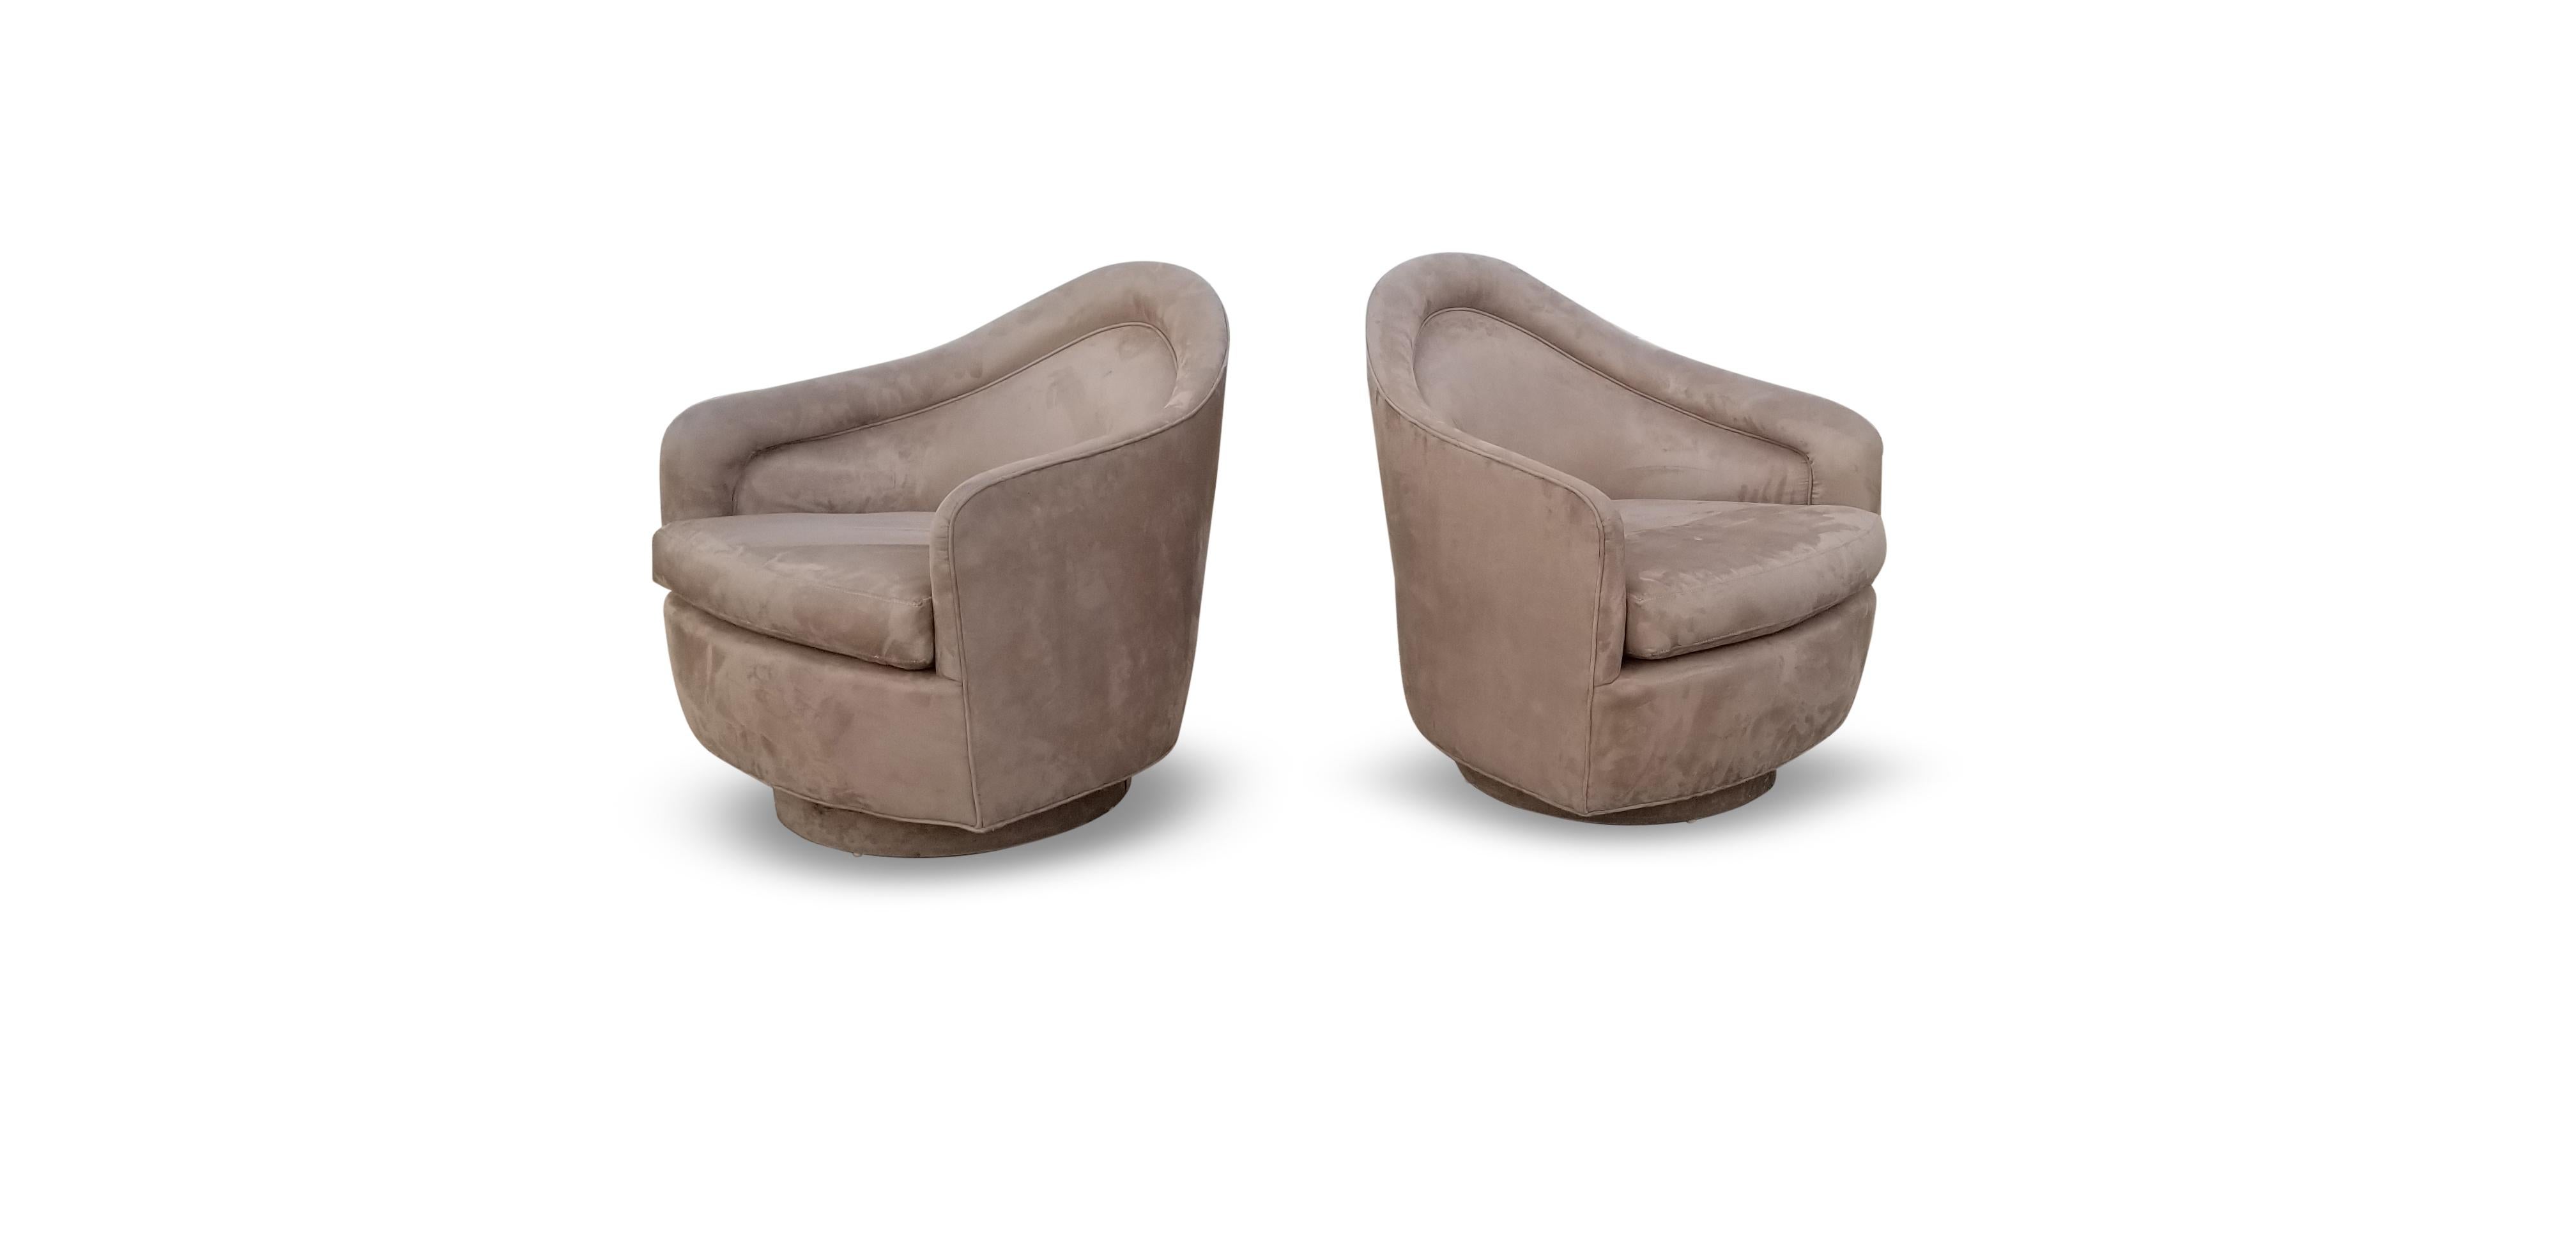 American Pair of Rocking Swivel Lounge Chairs by Milo Baughman